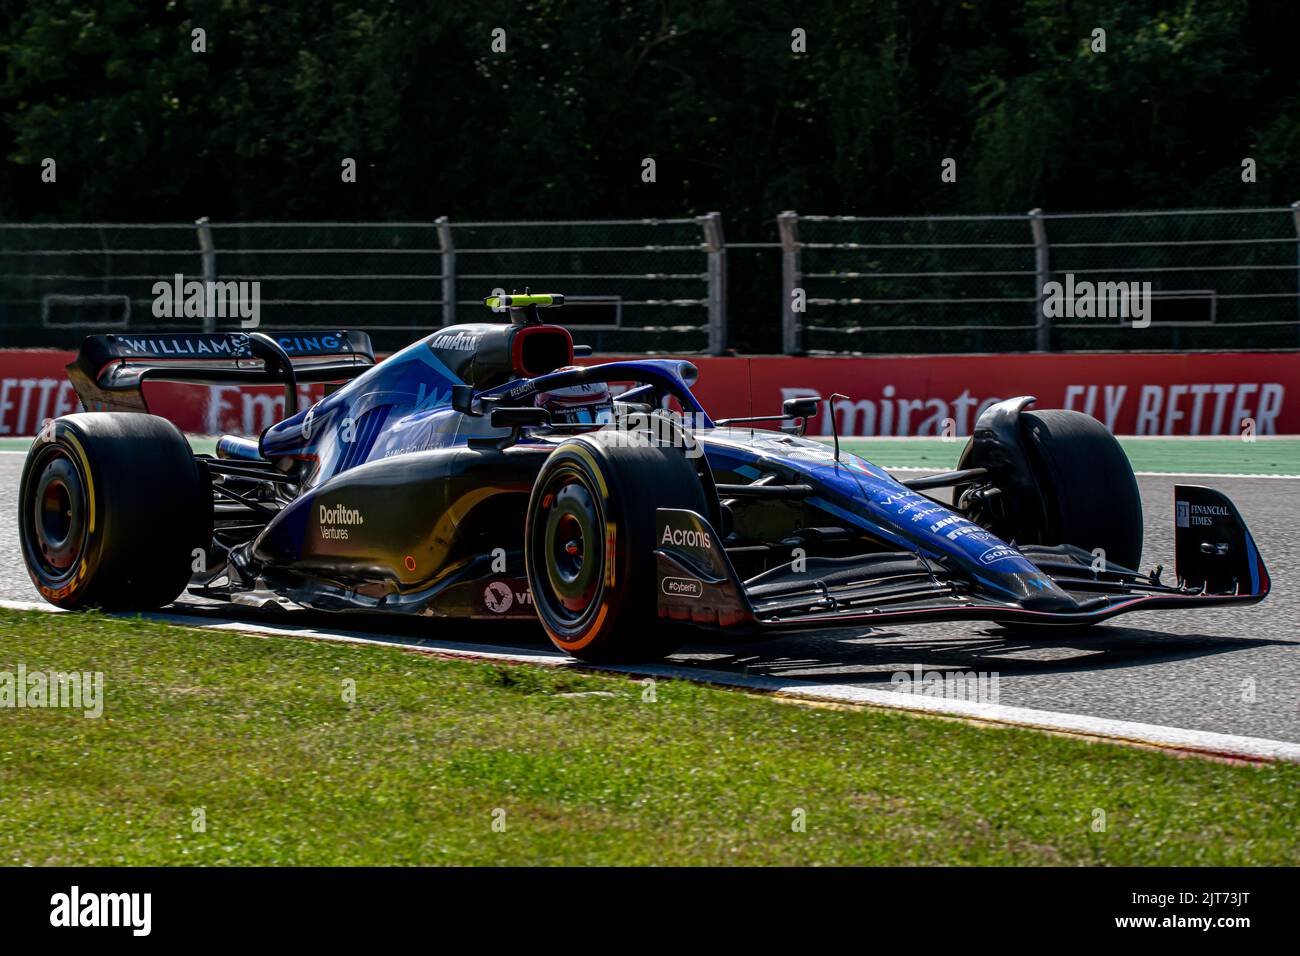 Stavelot, Belgium, 28th Aug 2022, Nicholas Latifi, from Canada competes for Williams Racing. Race day, round 14 of the 2022 Formula 1 championship. Credit: Michael Potts/Alamy Live News Stock Photo